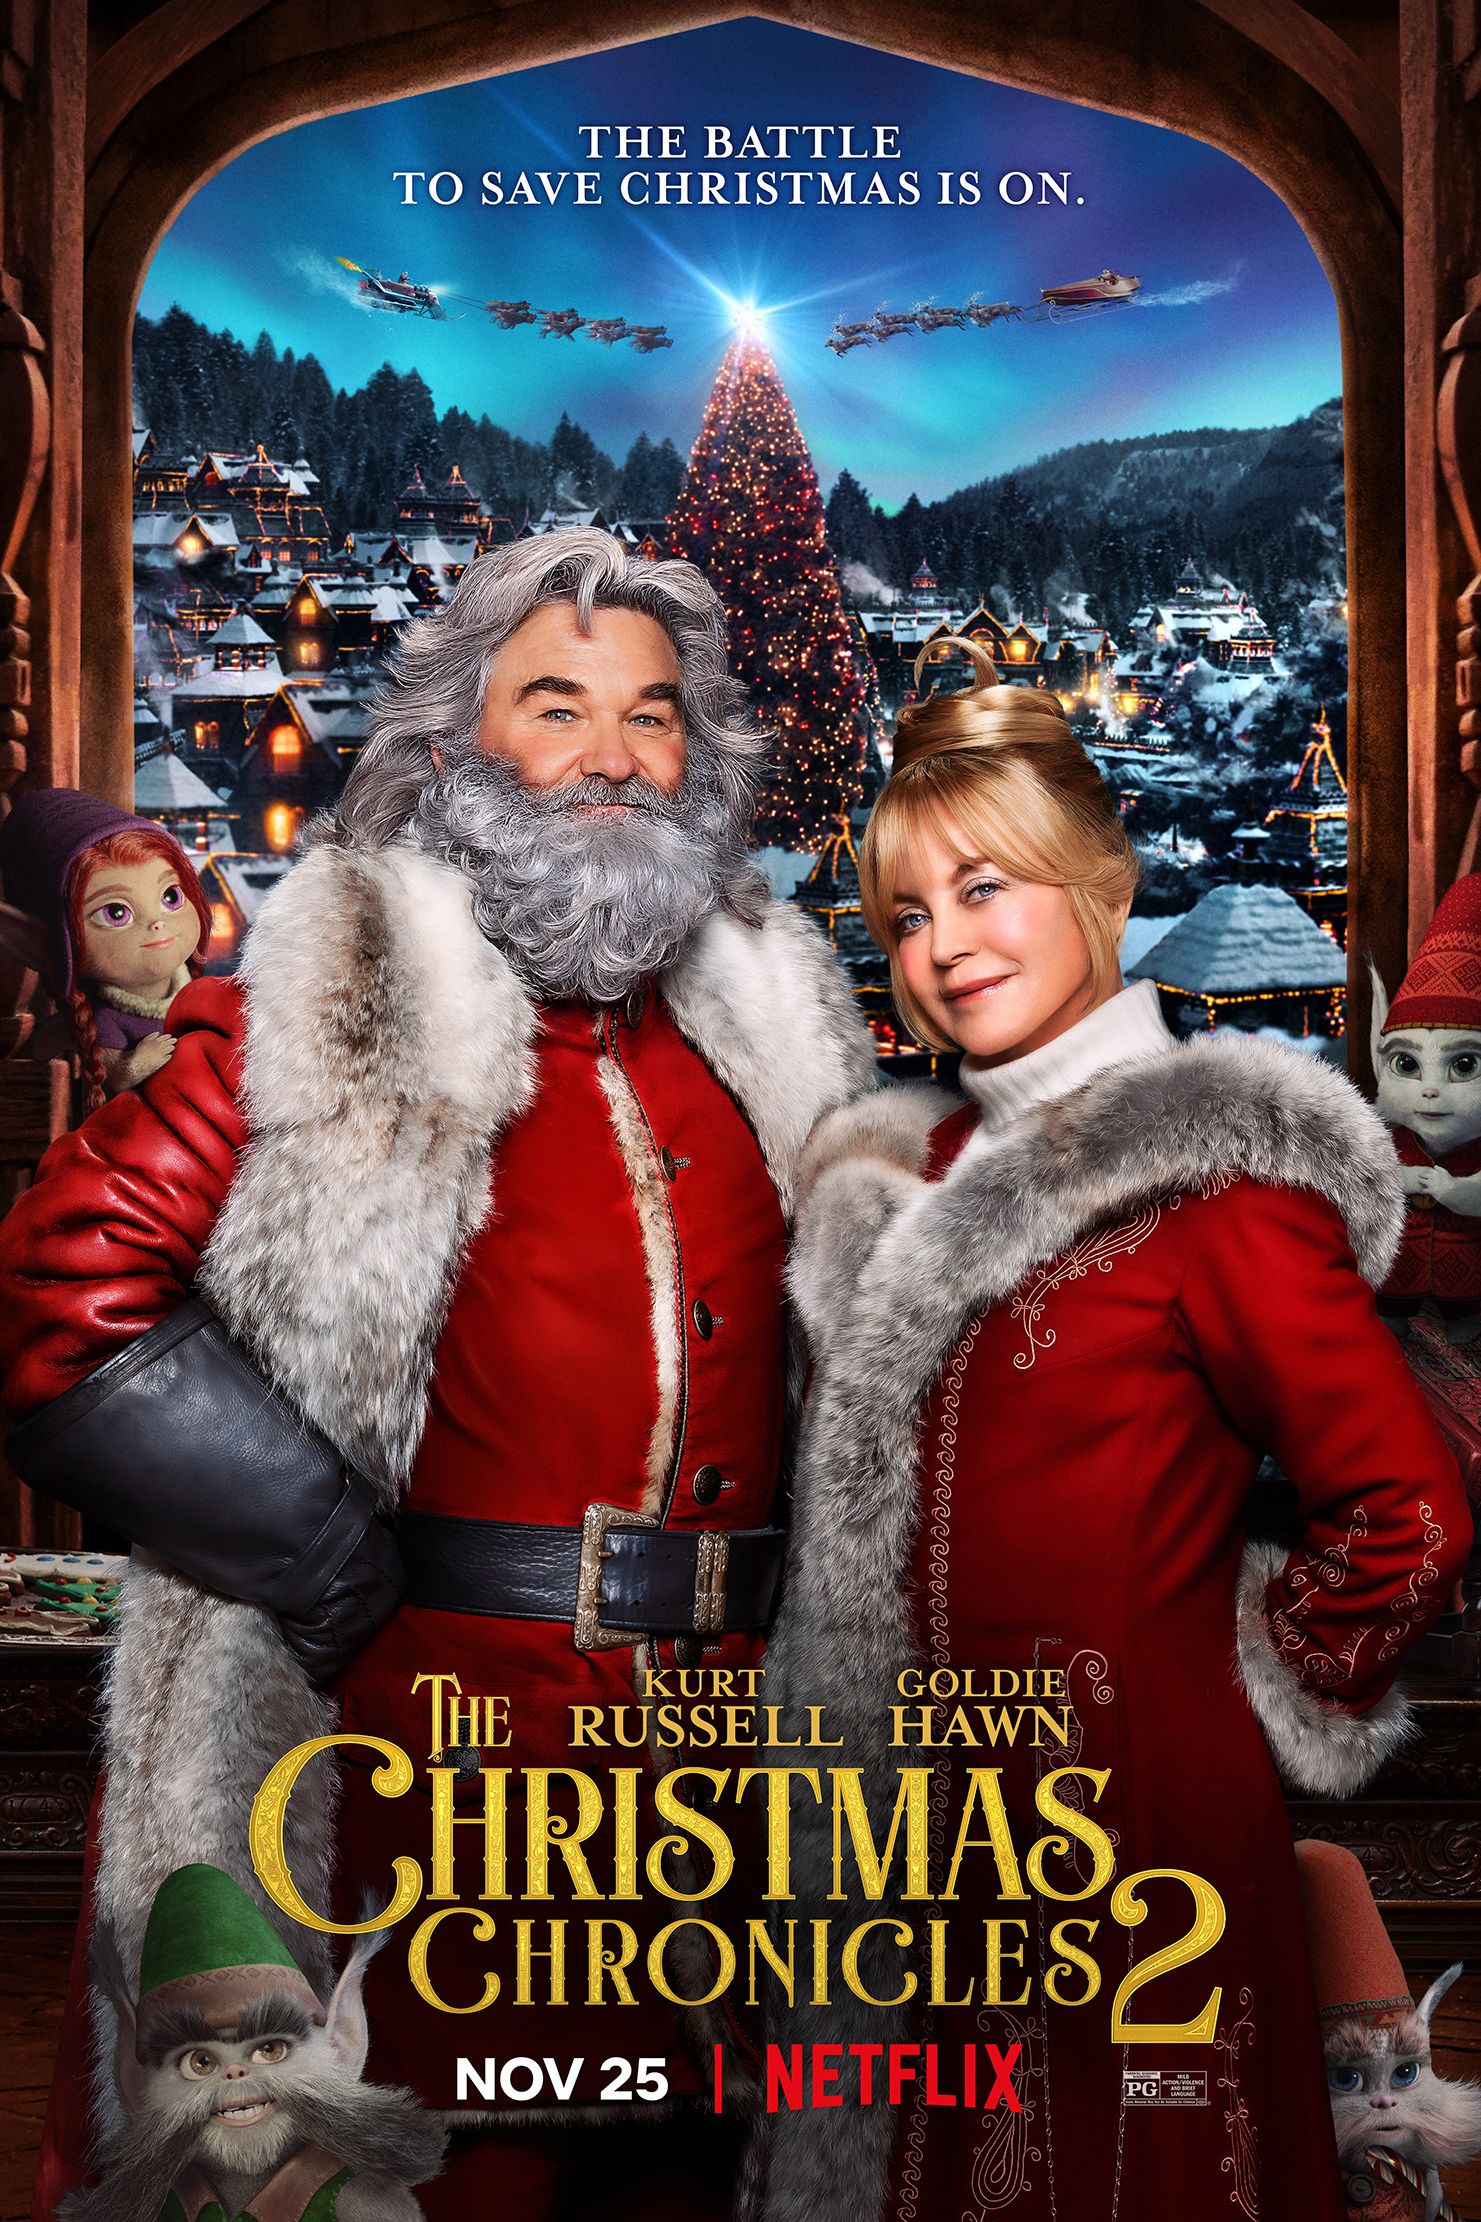 The Christmas Chronicles 2 Movie Poster